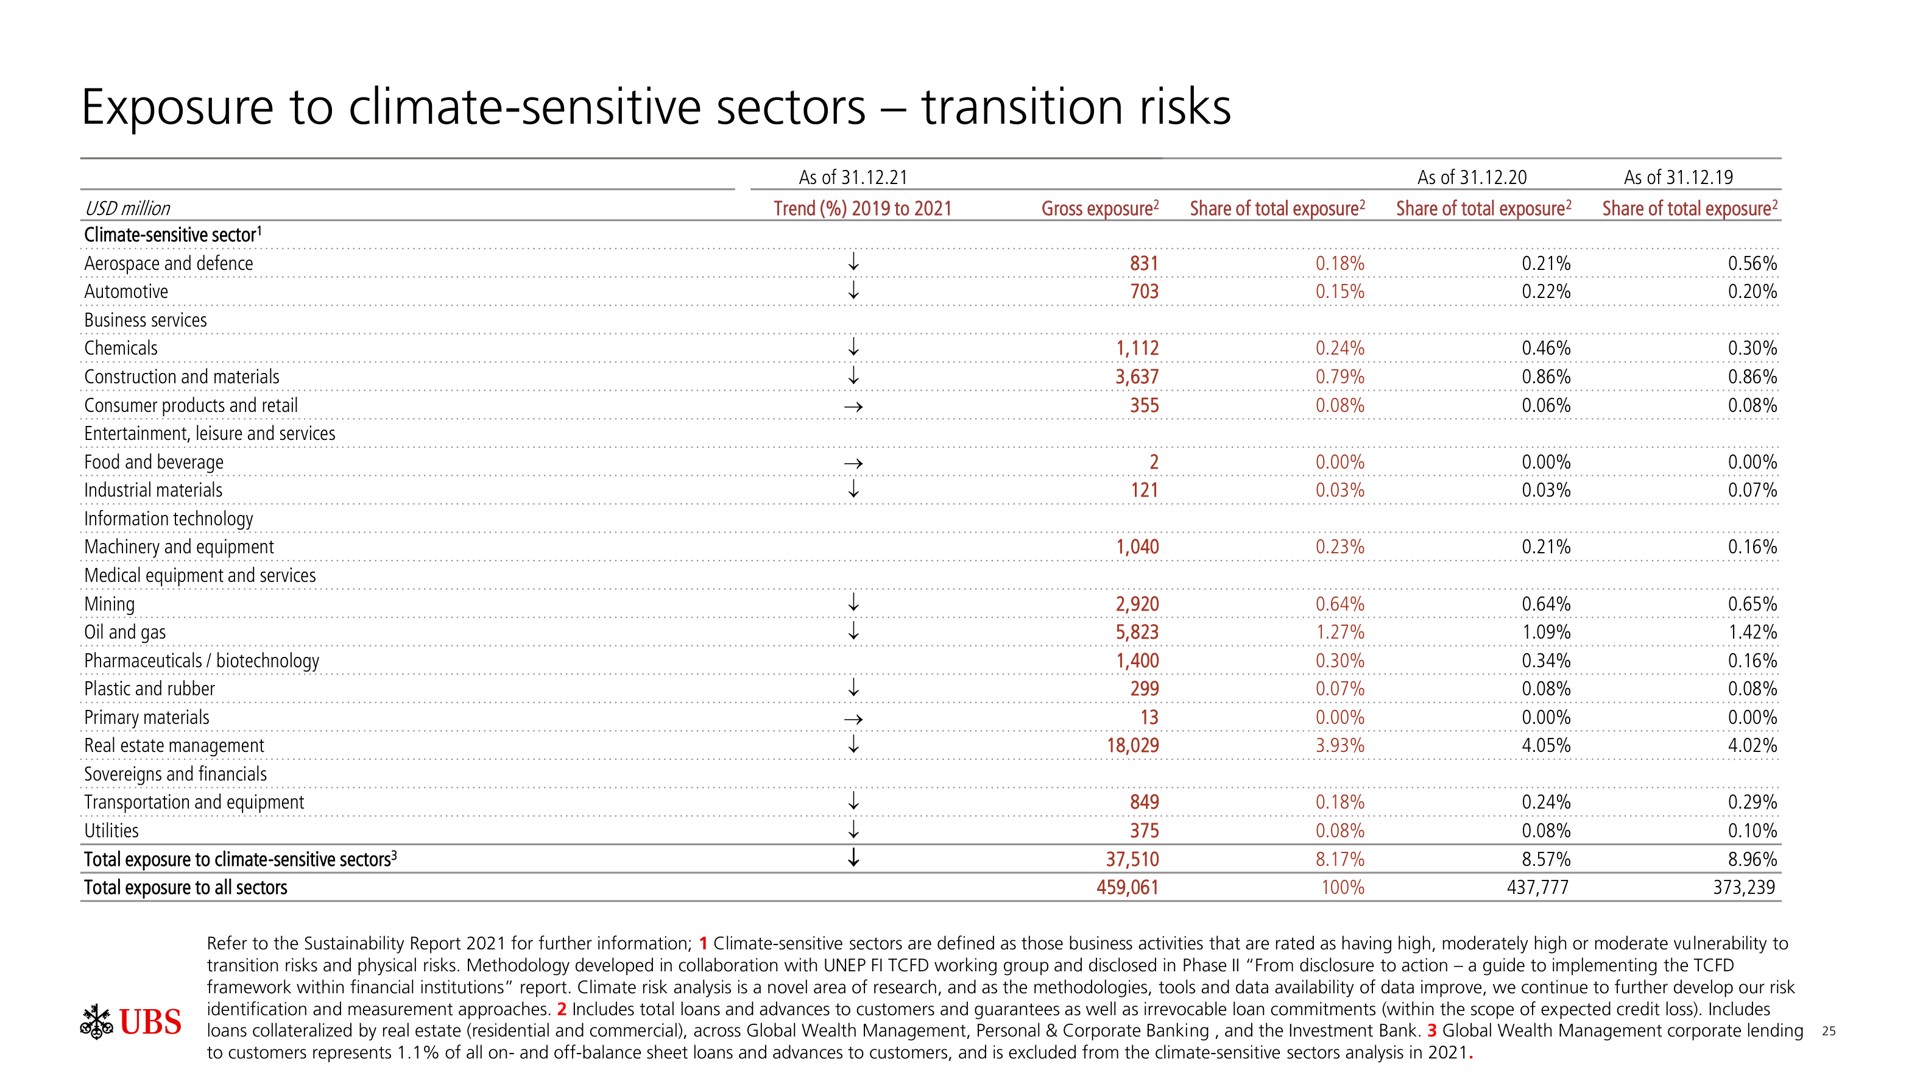 exposure to climate sensitive sectors transition risks chemicals consumer products and retail leisure and services entertainment and services medical equipment cine a a a | UBS